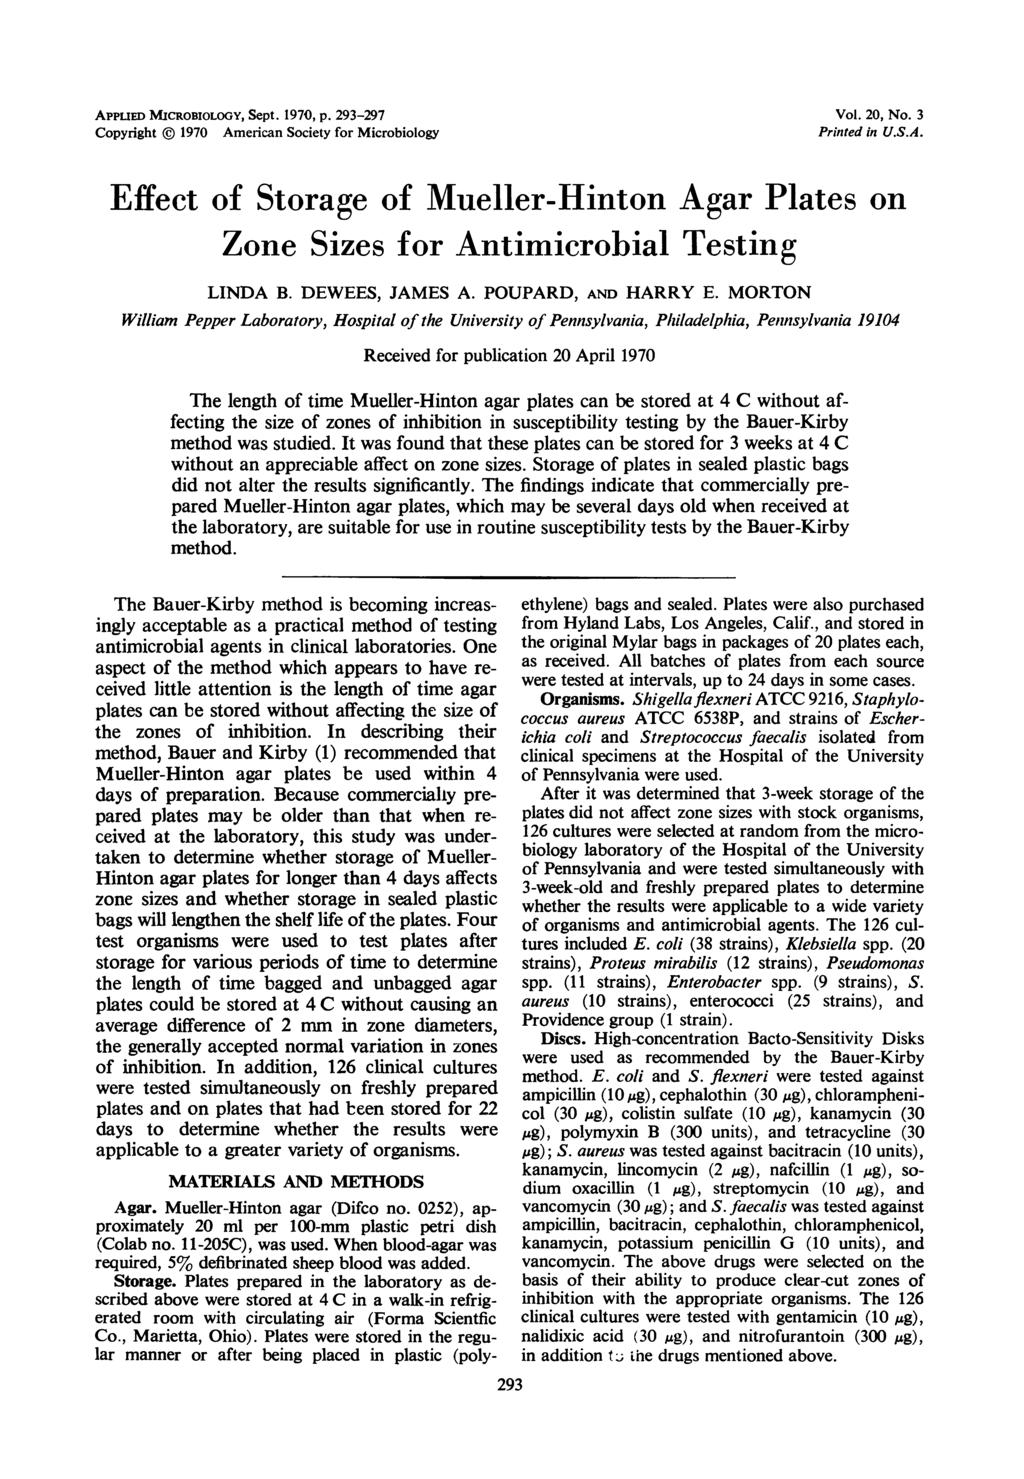 APPUED MICROBIOLOGY, Sept. 1970, p. 293-297 Copyright 1970 American Society for Microbiology Vol. 20, No. 3 Printed in U.S.A. Effect of Storage of Mueller-Hinton Agar Plates on Zone Sizes for Antimicrobial Testing LINDA B.